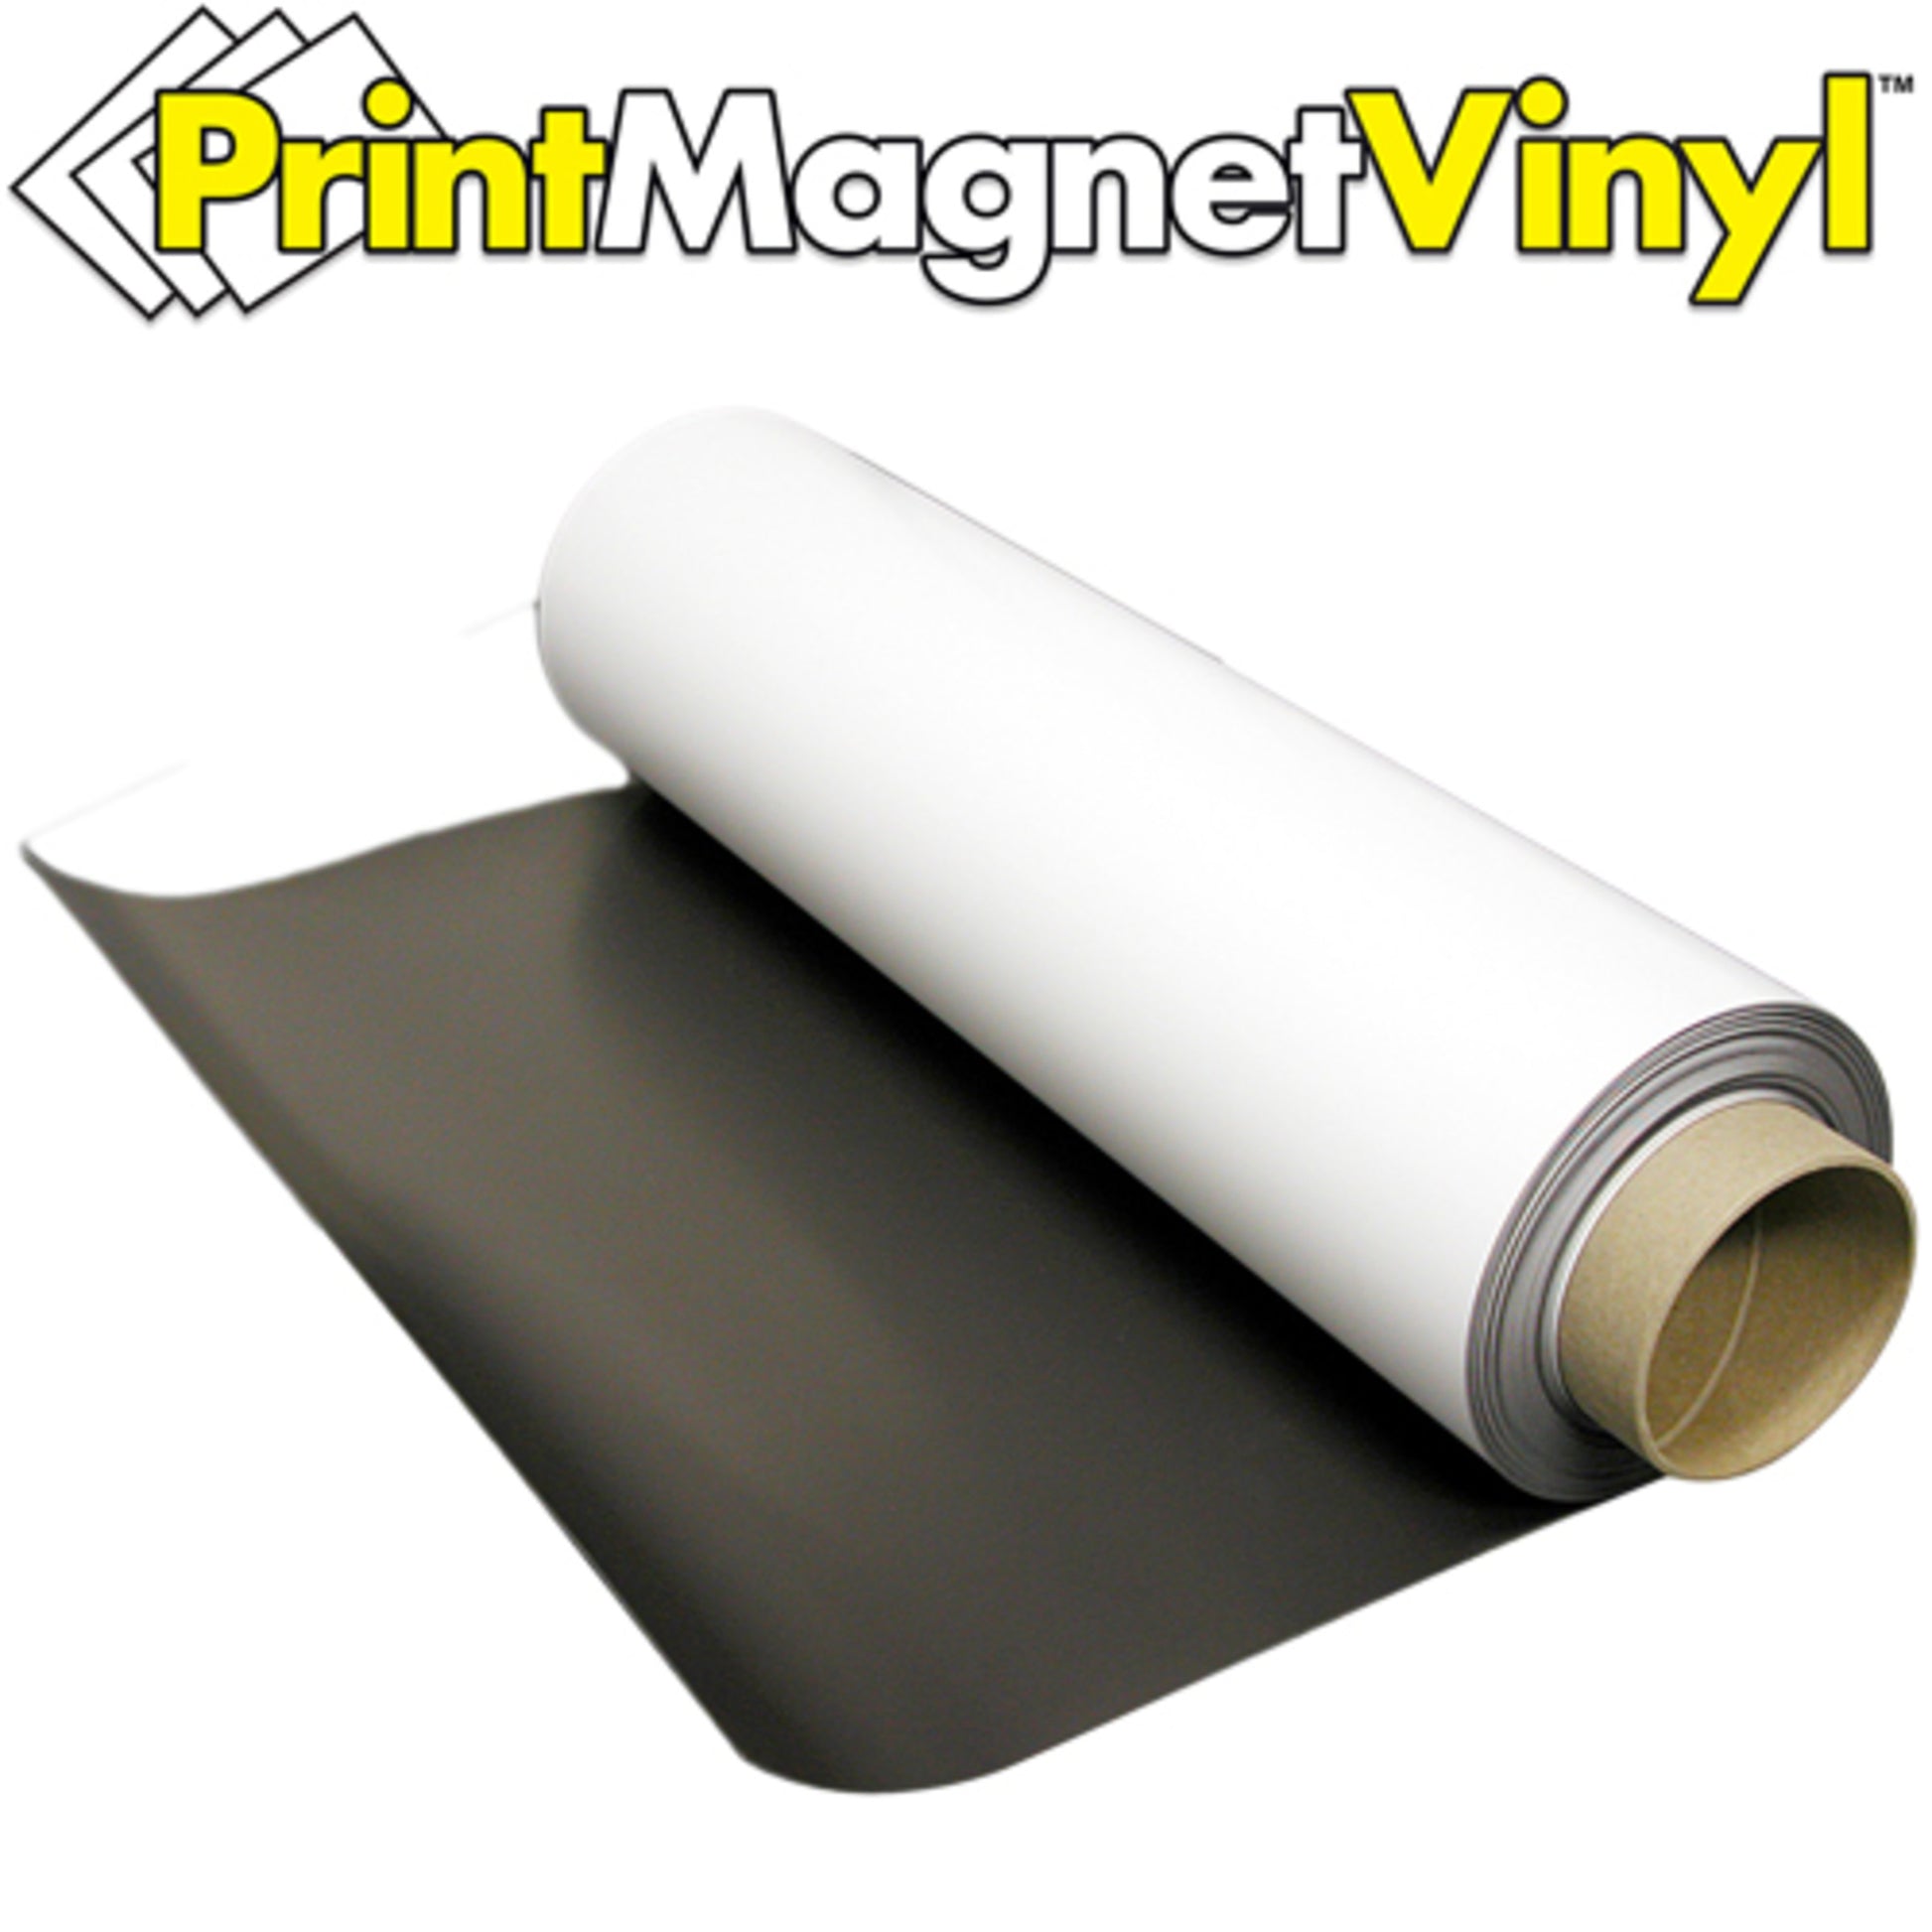 Load image into Gallery viewer, ZG3030GW50F PrintMagnetVinyl™ Flexible Magnetic Sheet - In Use